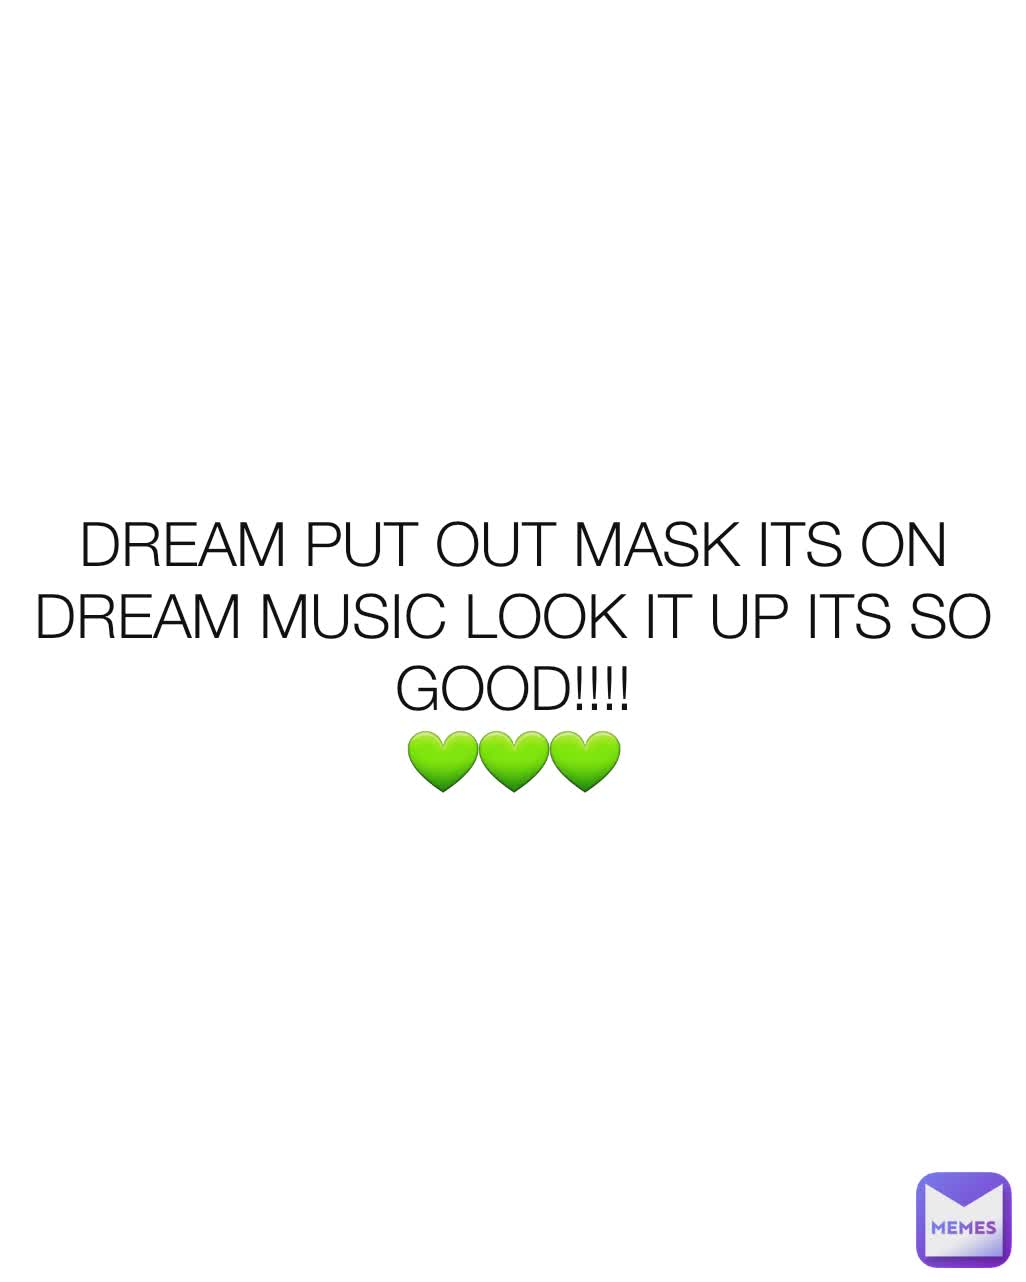 DREAM PUT OUT MASK ITS ON DREAM MUSIC LOOK IT UP ITS SO GOOD!!!!
💚💚💚